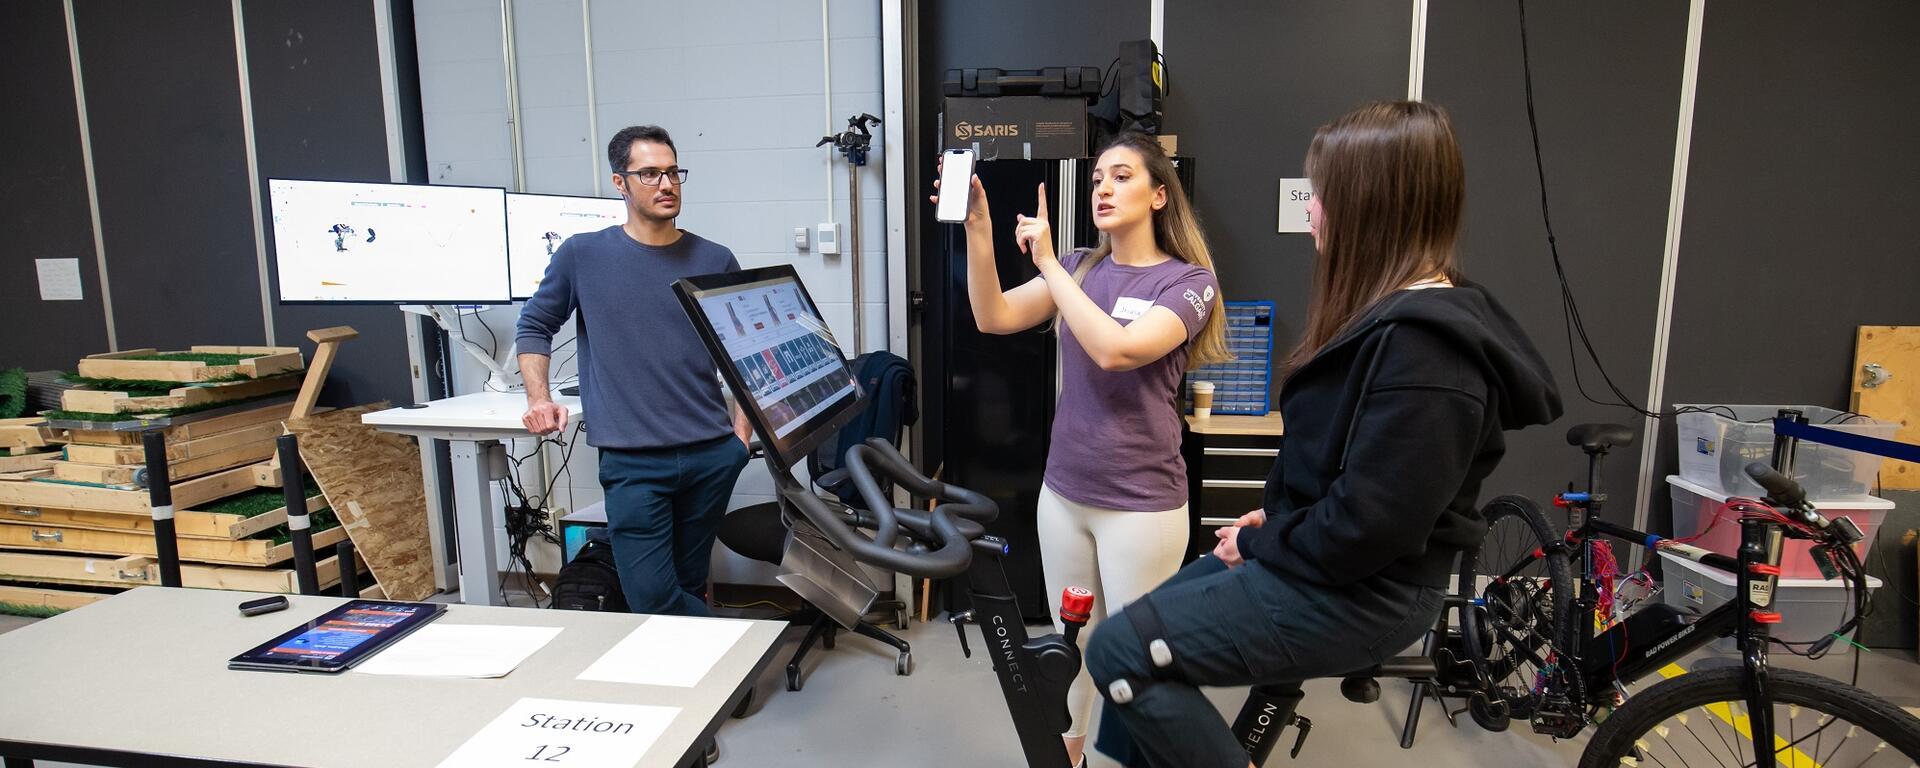 Student in the Human Performance Lab pointing at device chatting with two other students